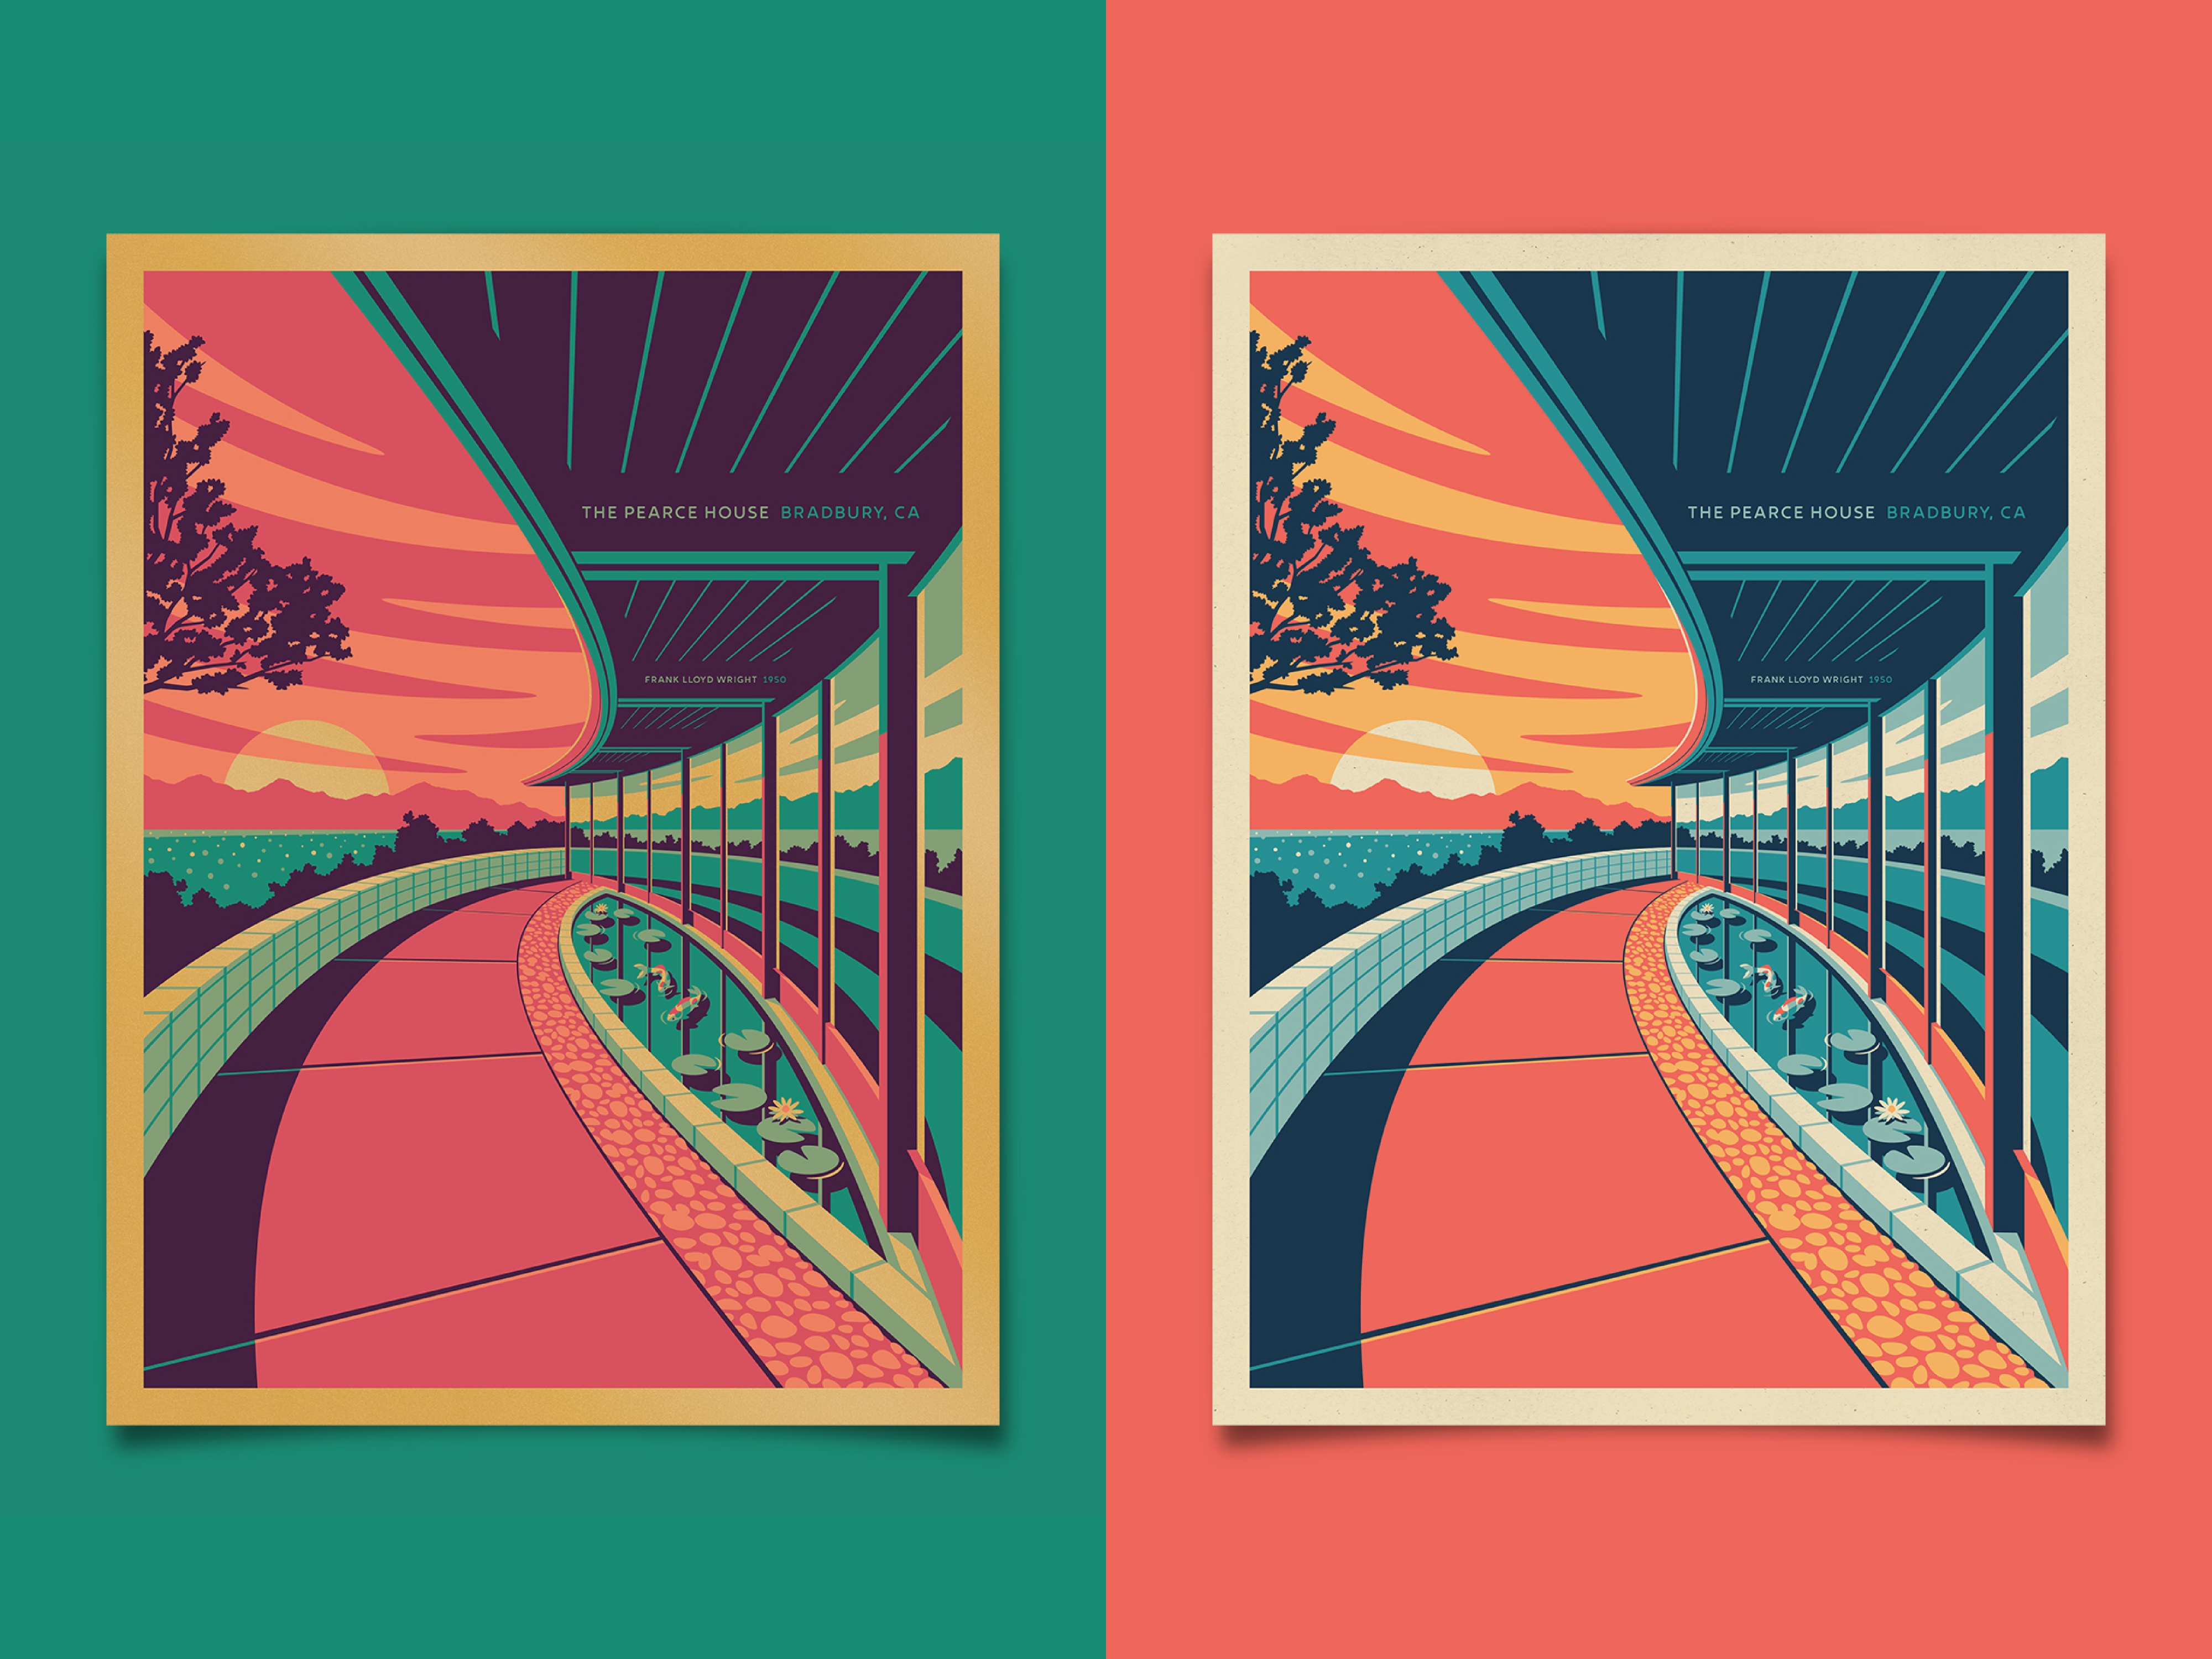 Frank Lloyd Wright - Pearce House Art Print by DKNG on Dribbble